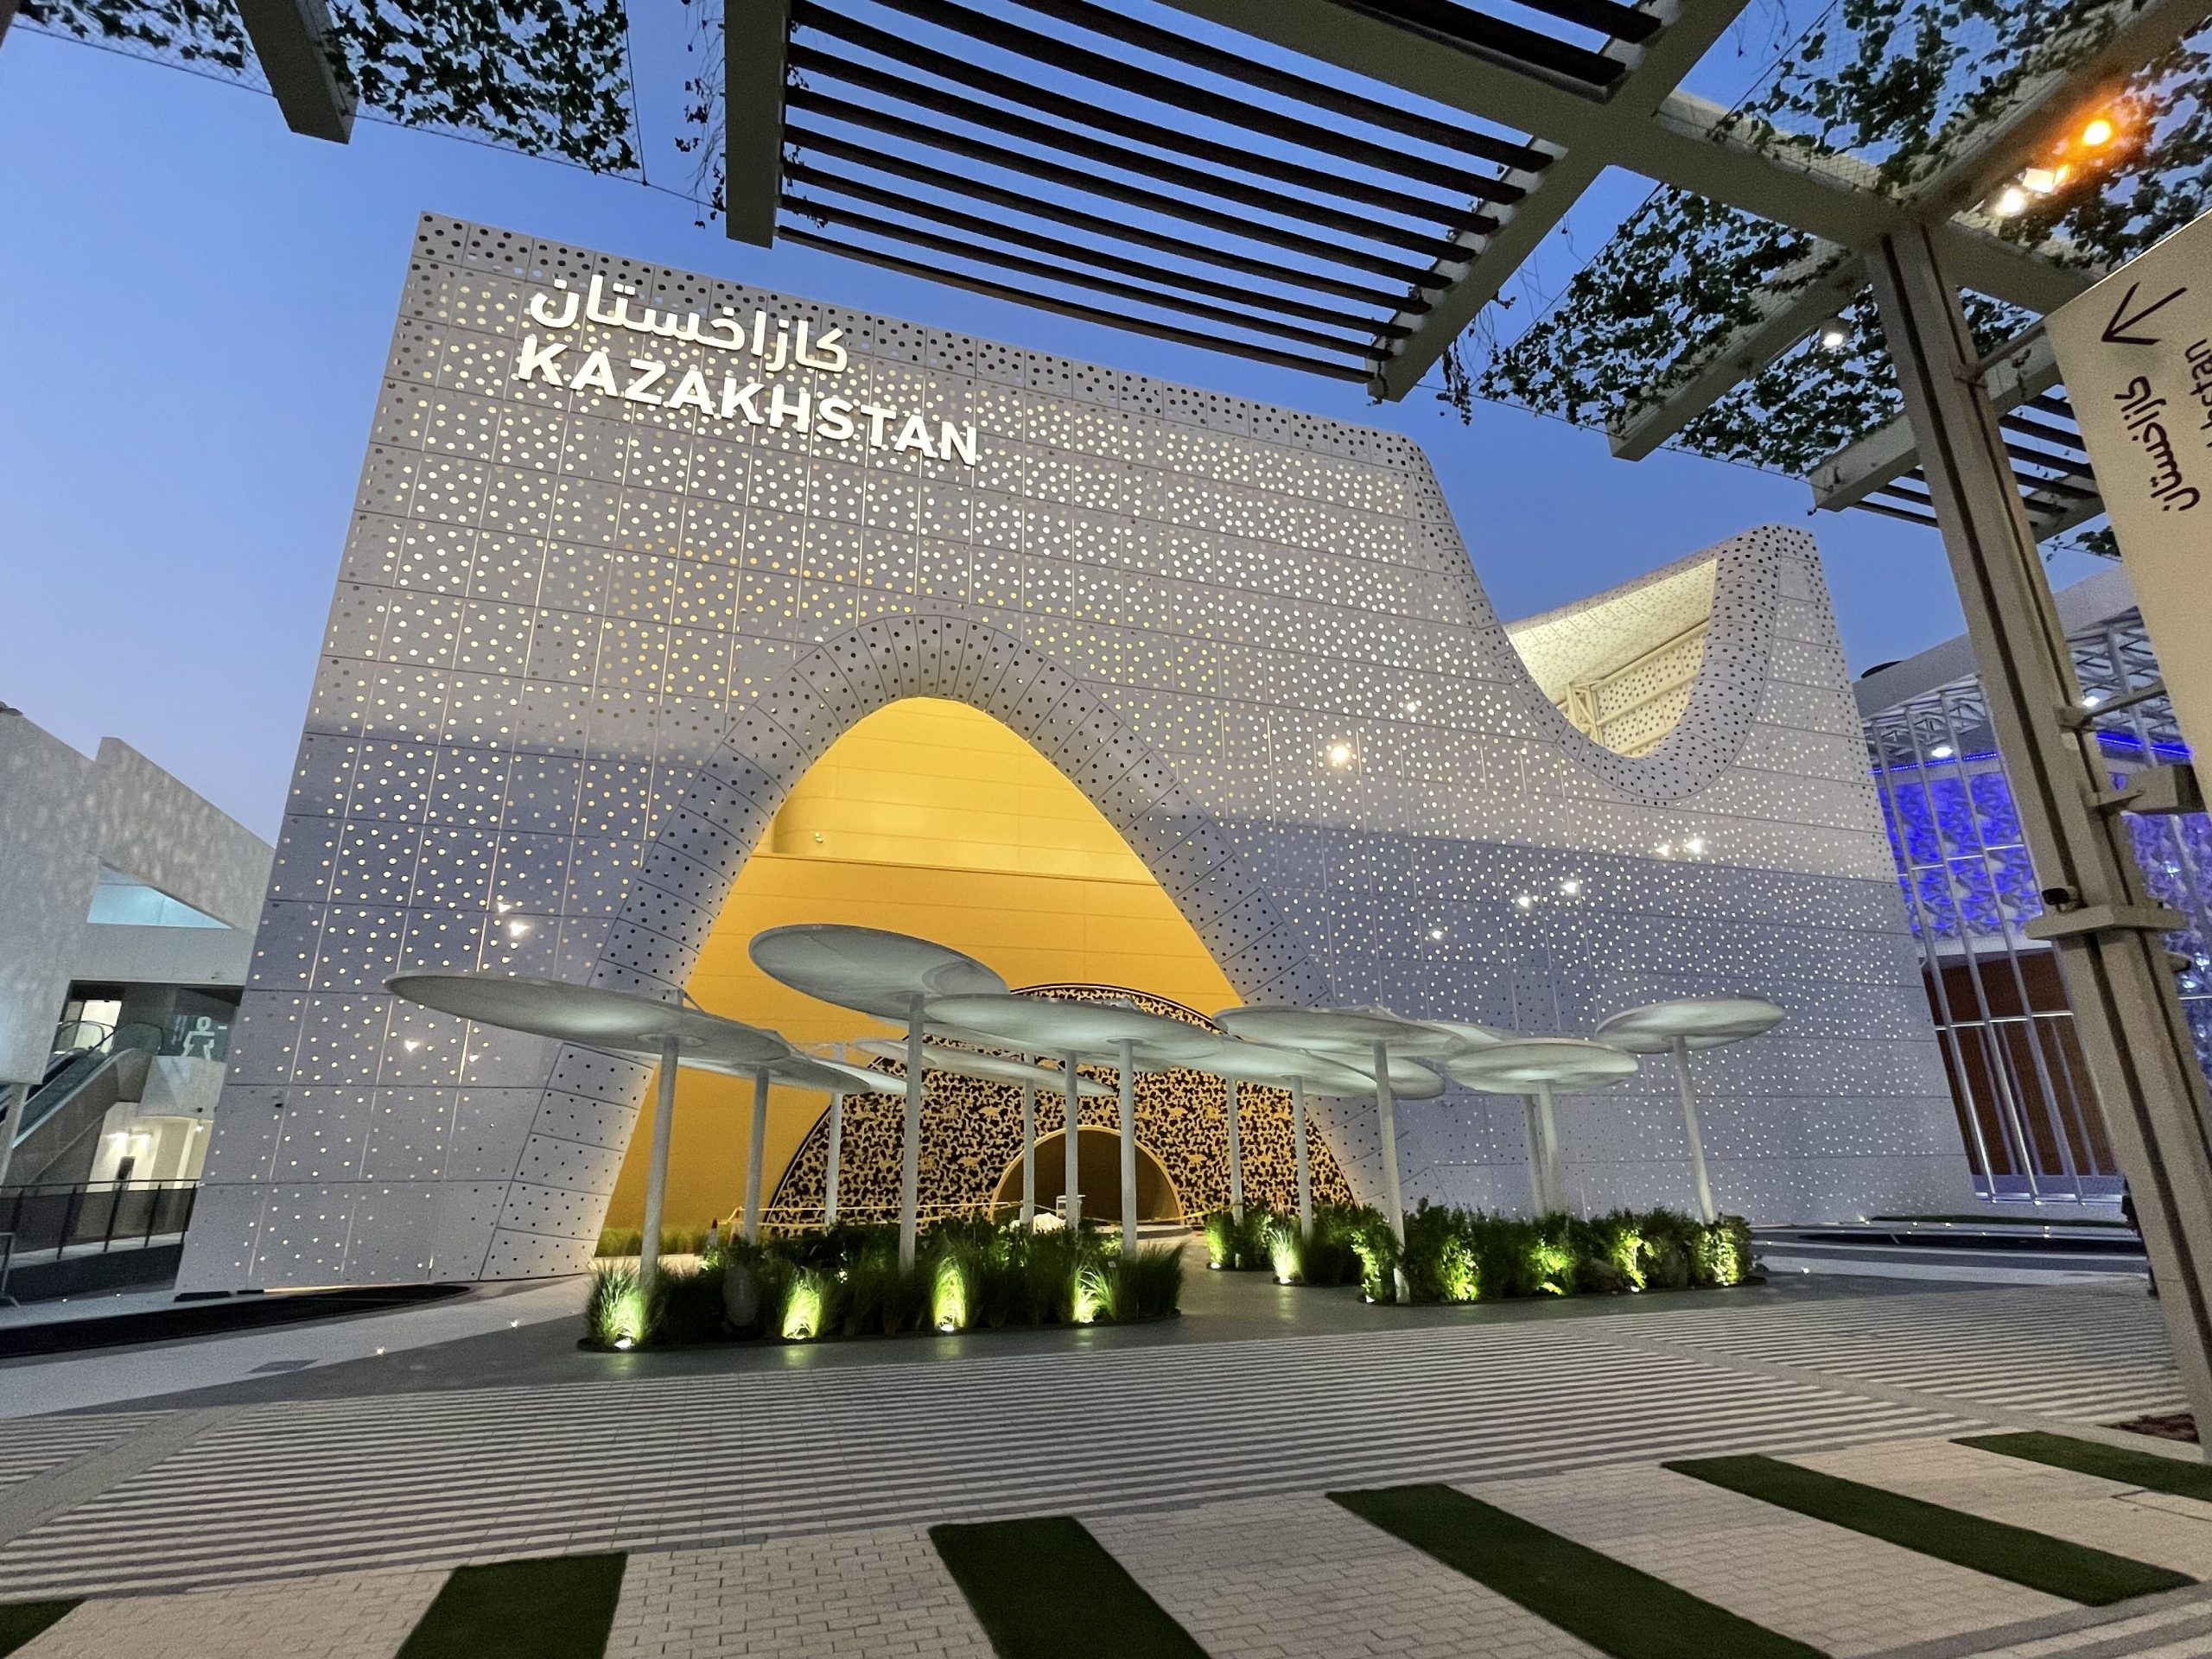 More than 200 thousand people have visited the pavilion of Kazakhstan since the opening of EXPO 2020 in Dubai